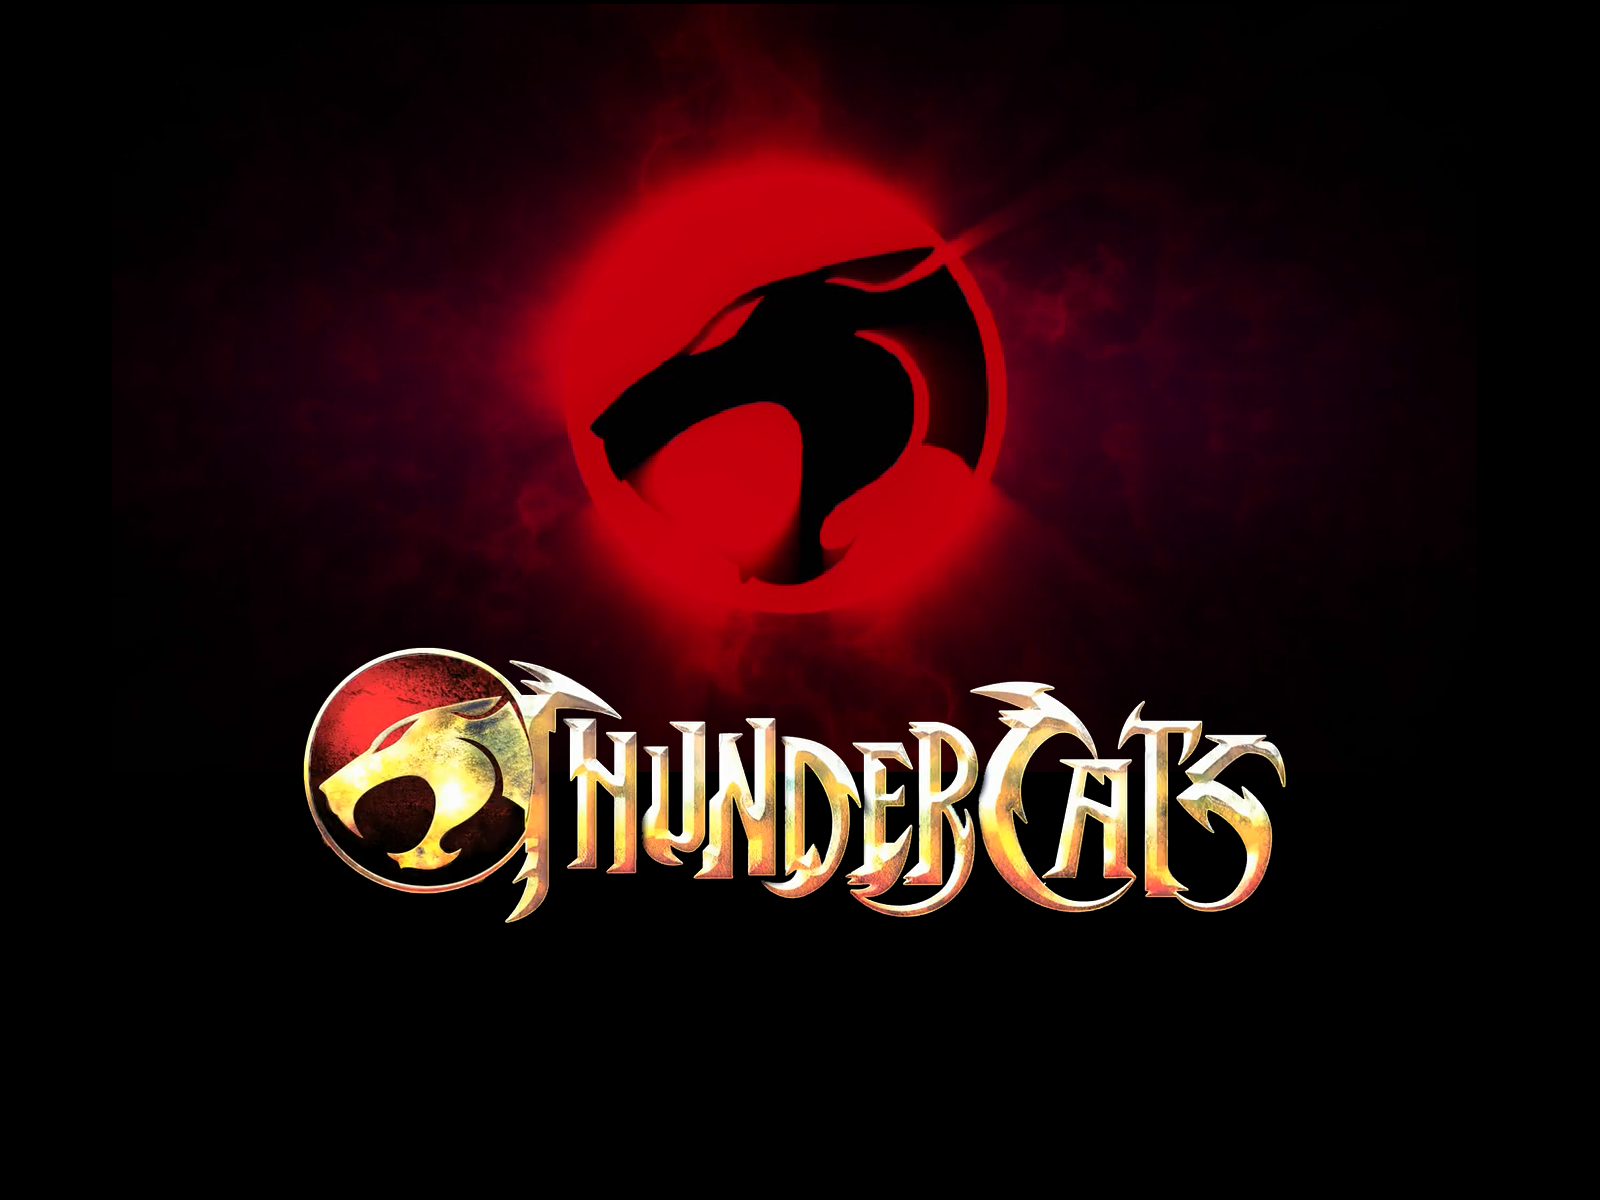 Thunder Cats Wallpapers - Wallpaper Cave